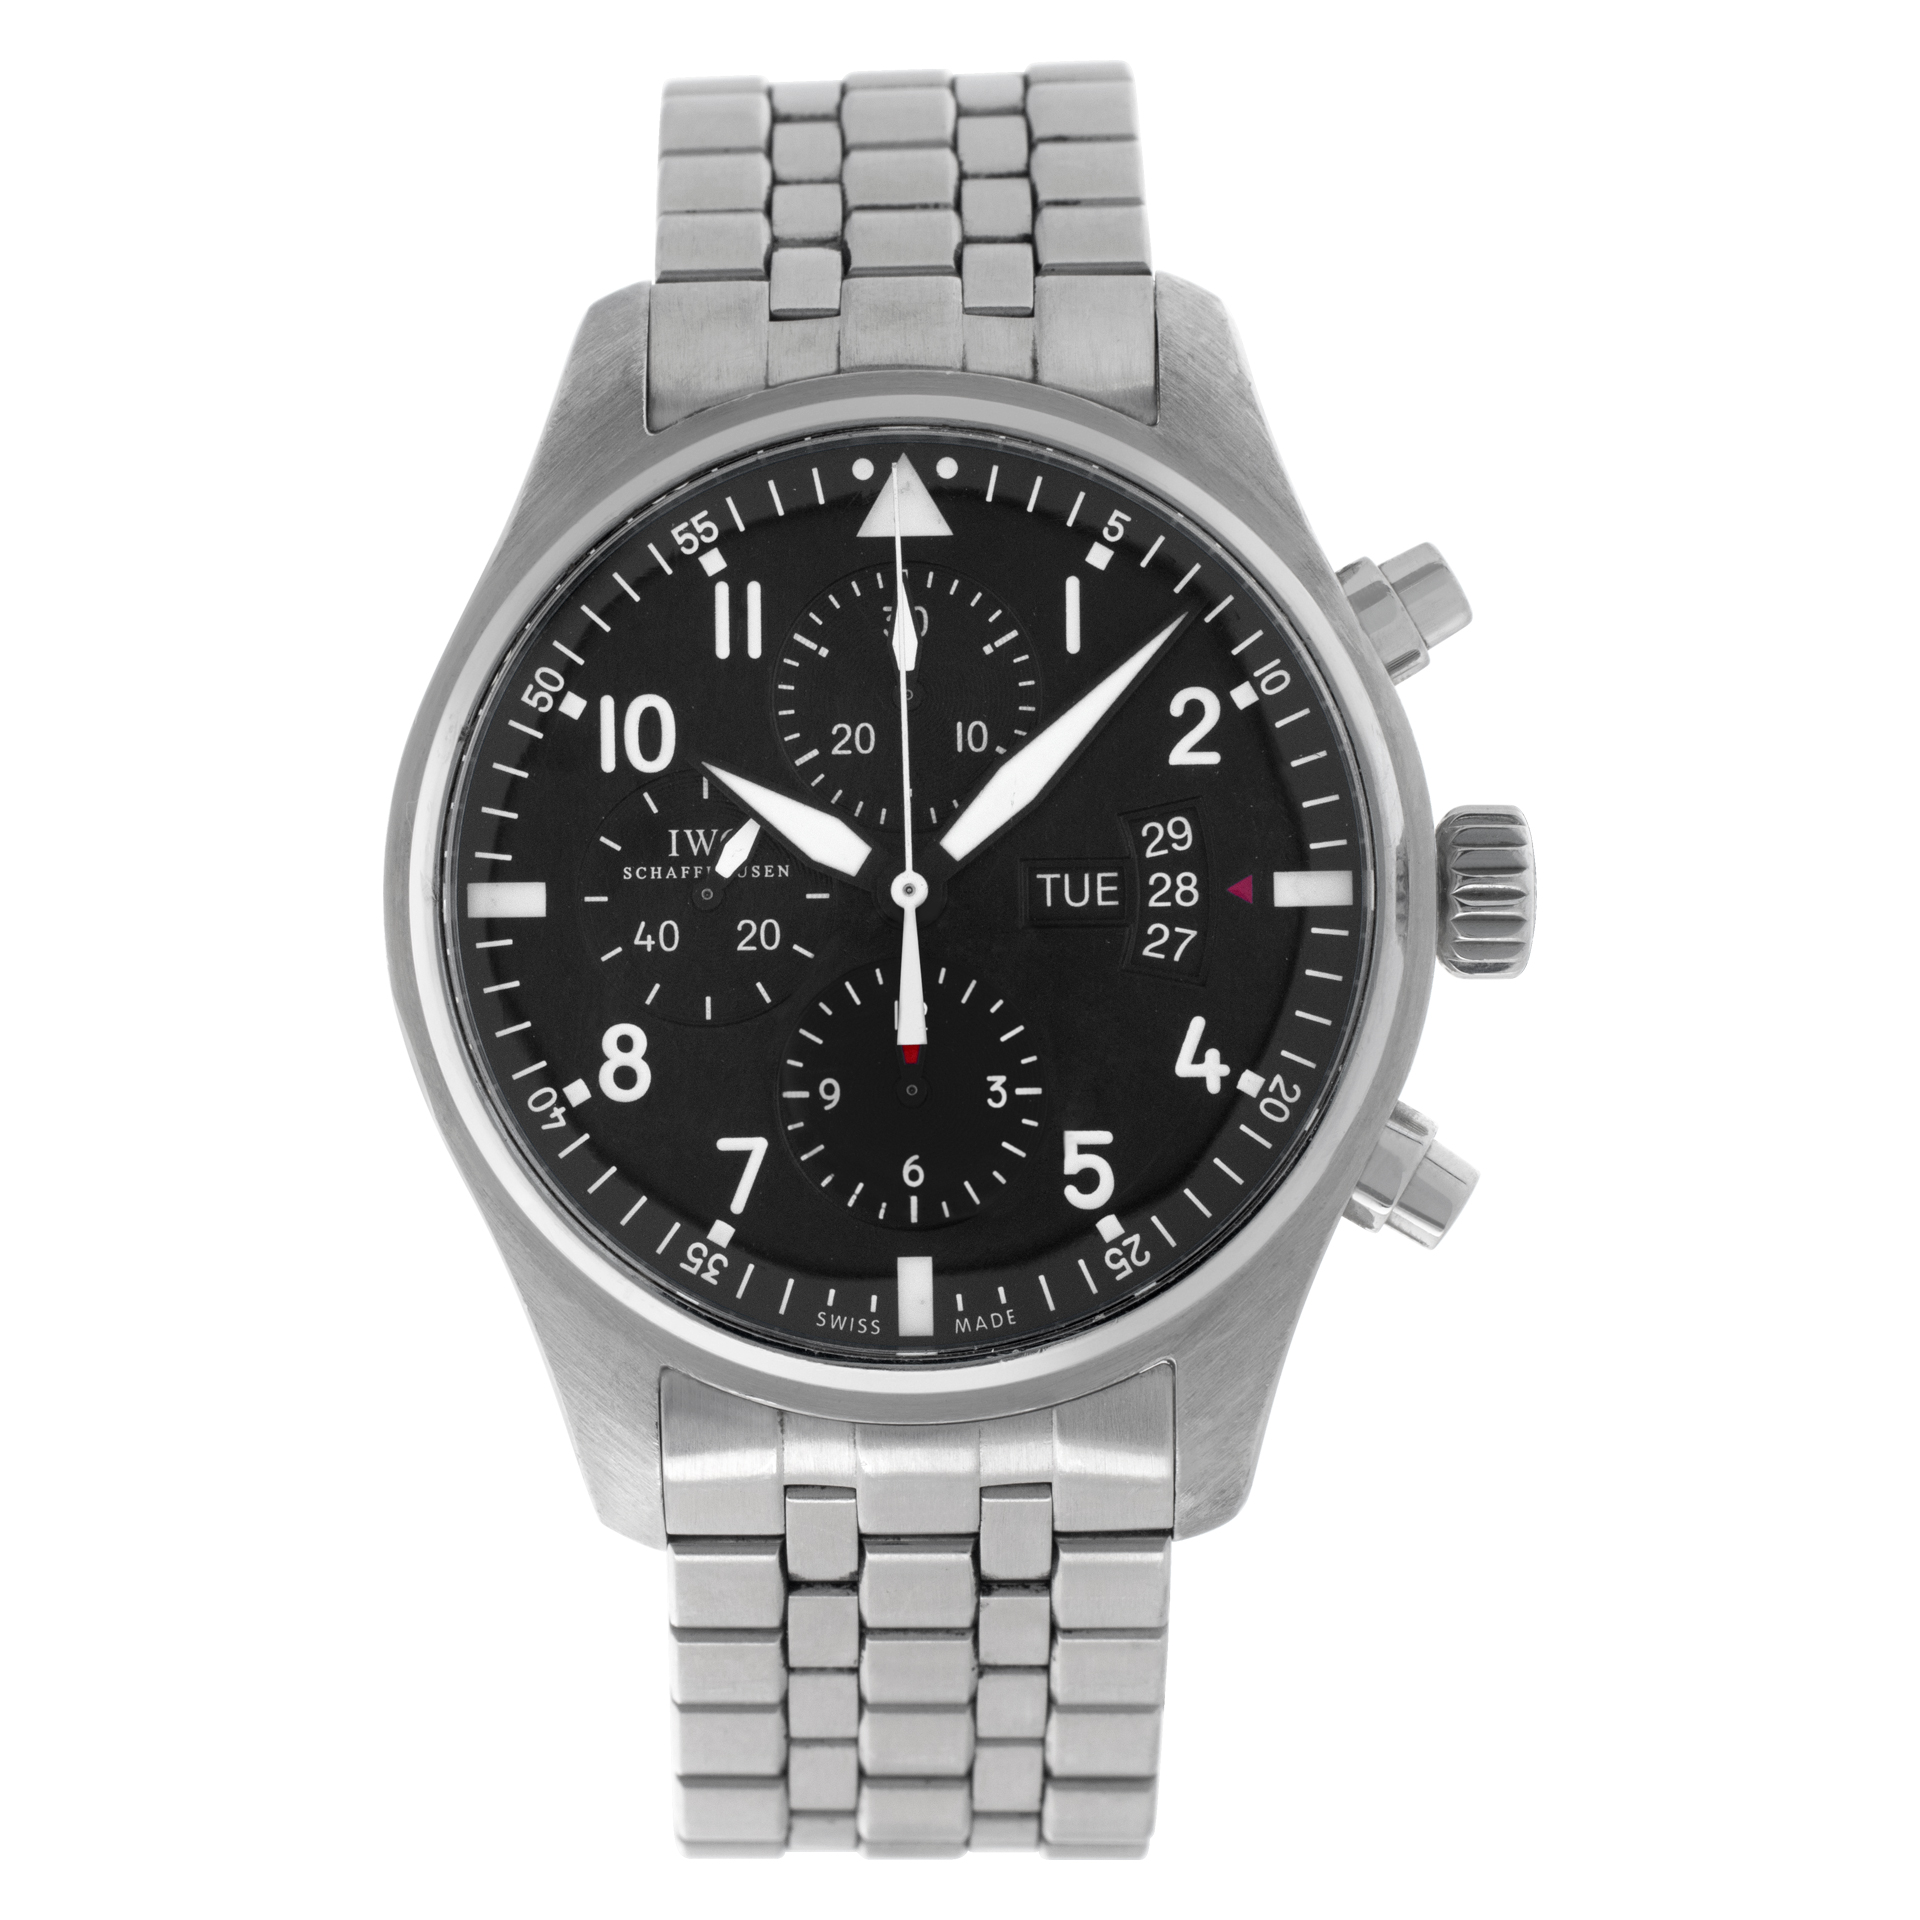 IWC Flieger Chronograph 43mm iw377704 (Watches)